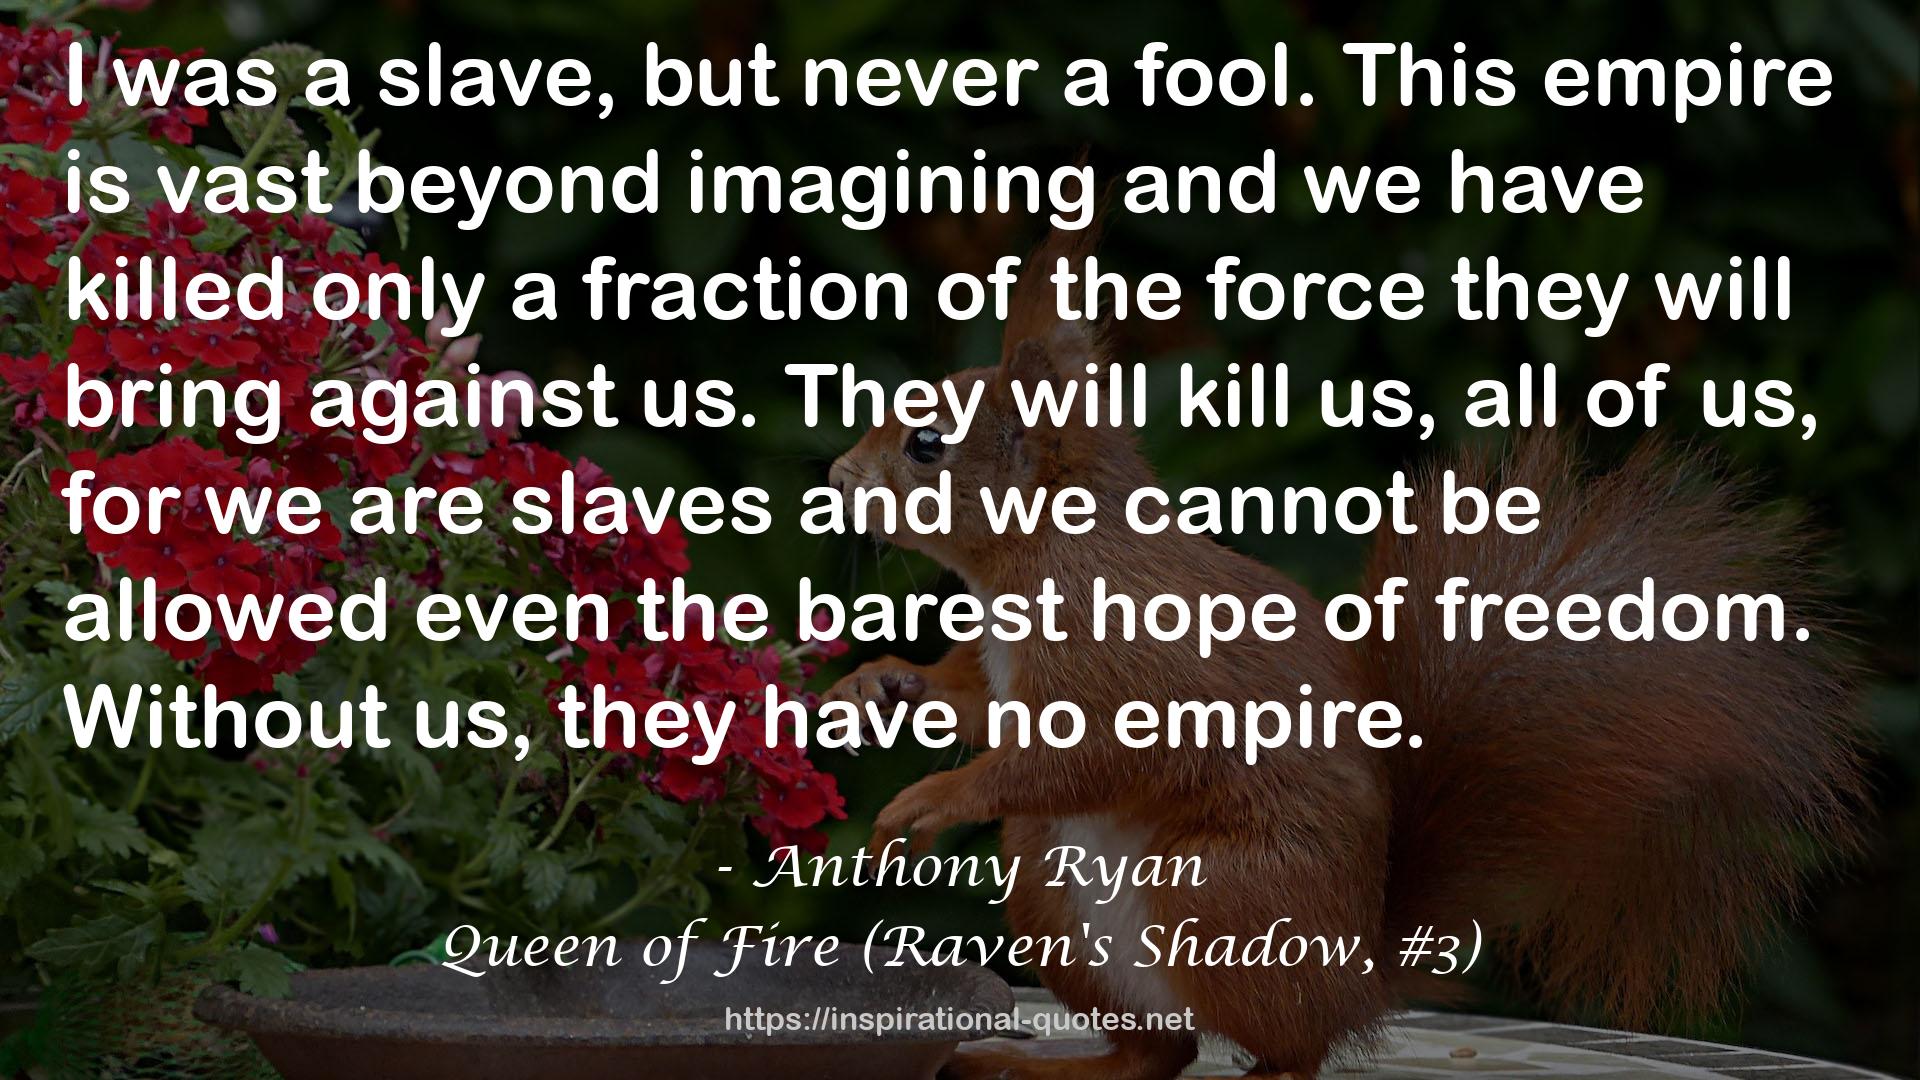 Queen of Fire (Raven's Shadow, #3) QUOTES